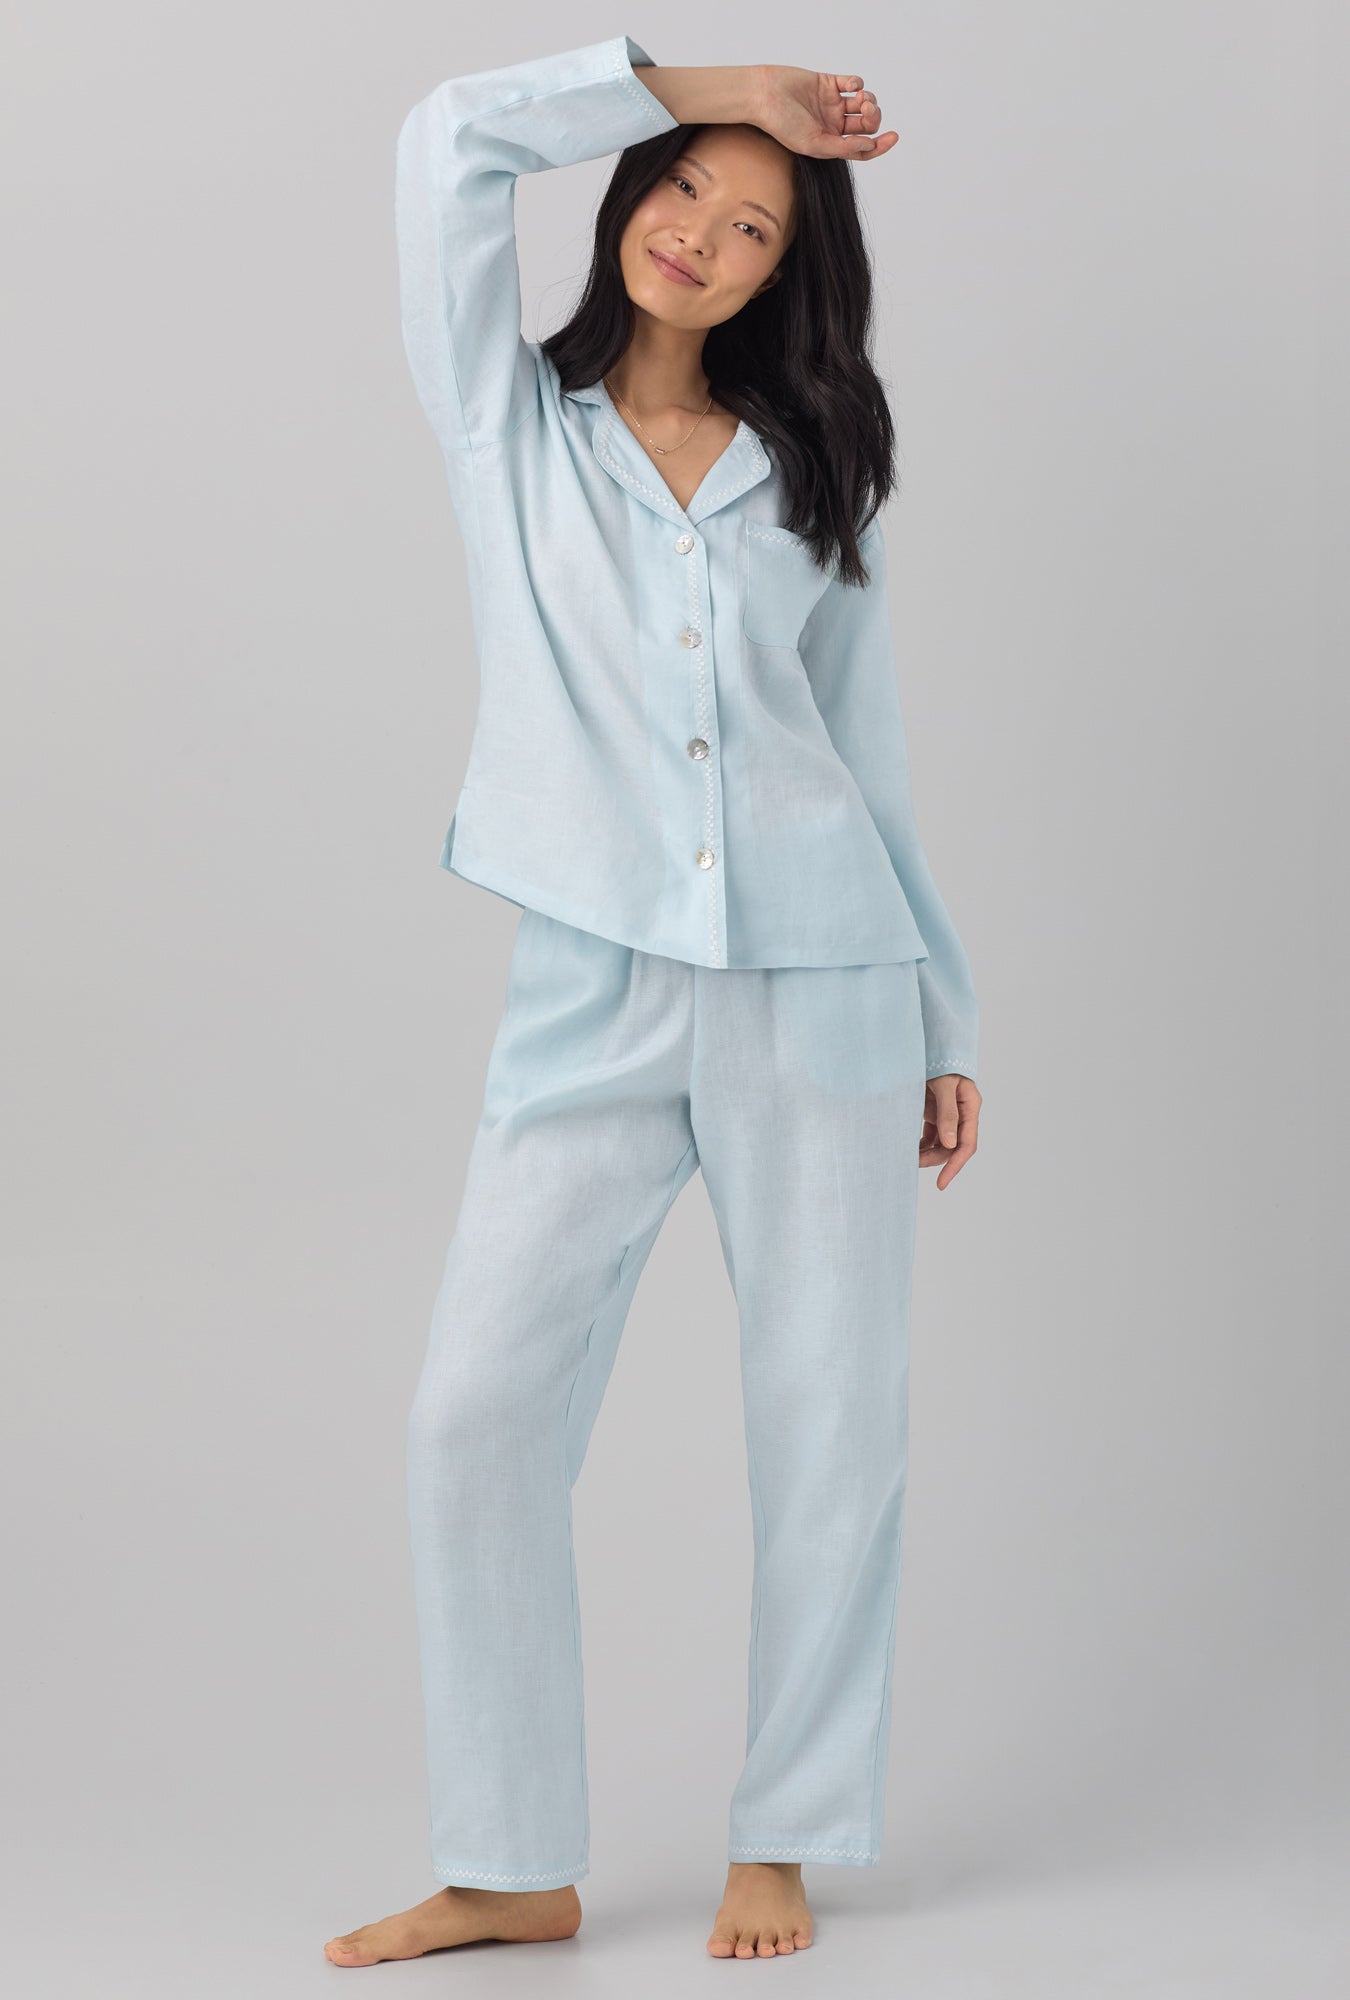 A lady wearing blue long sleeve classic linen pj set with delicate blue print.